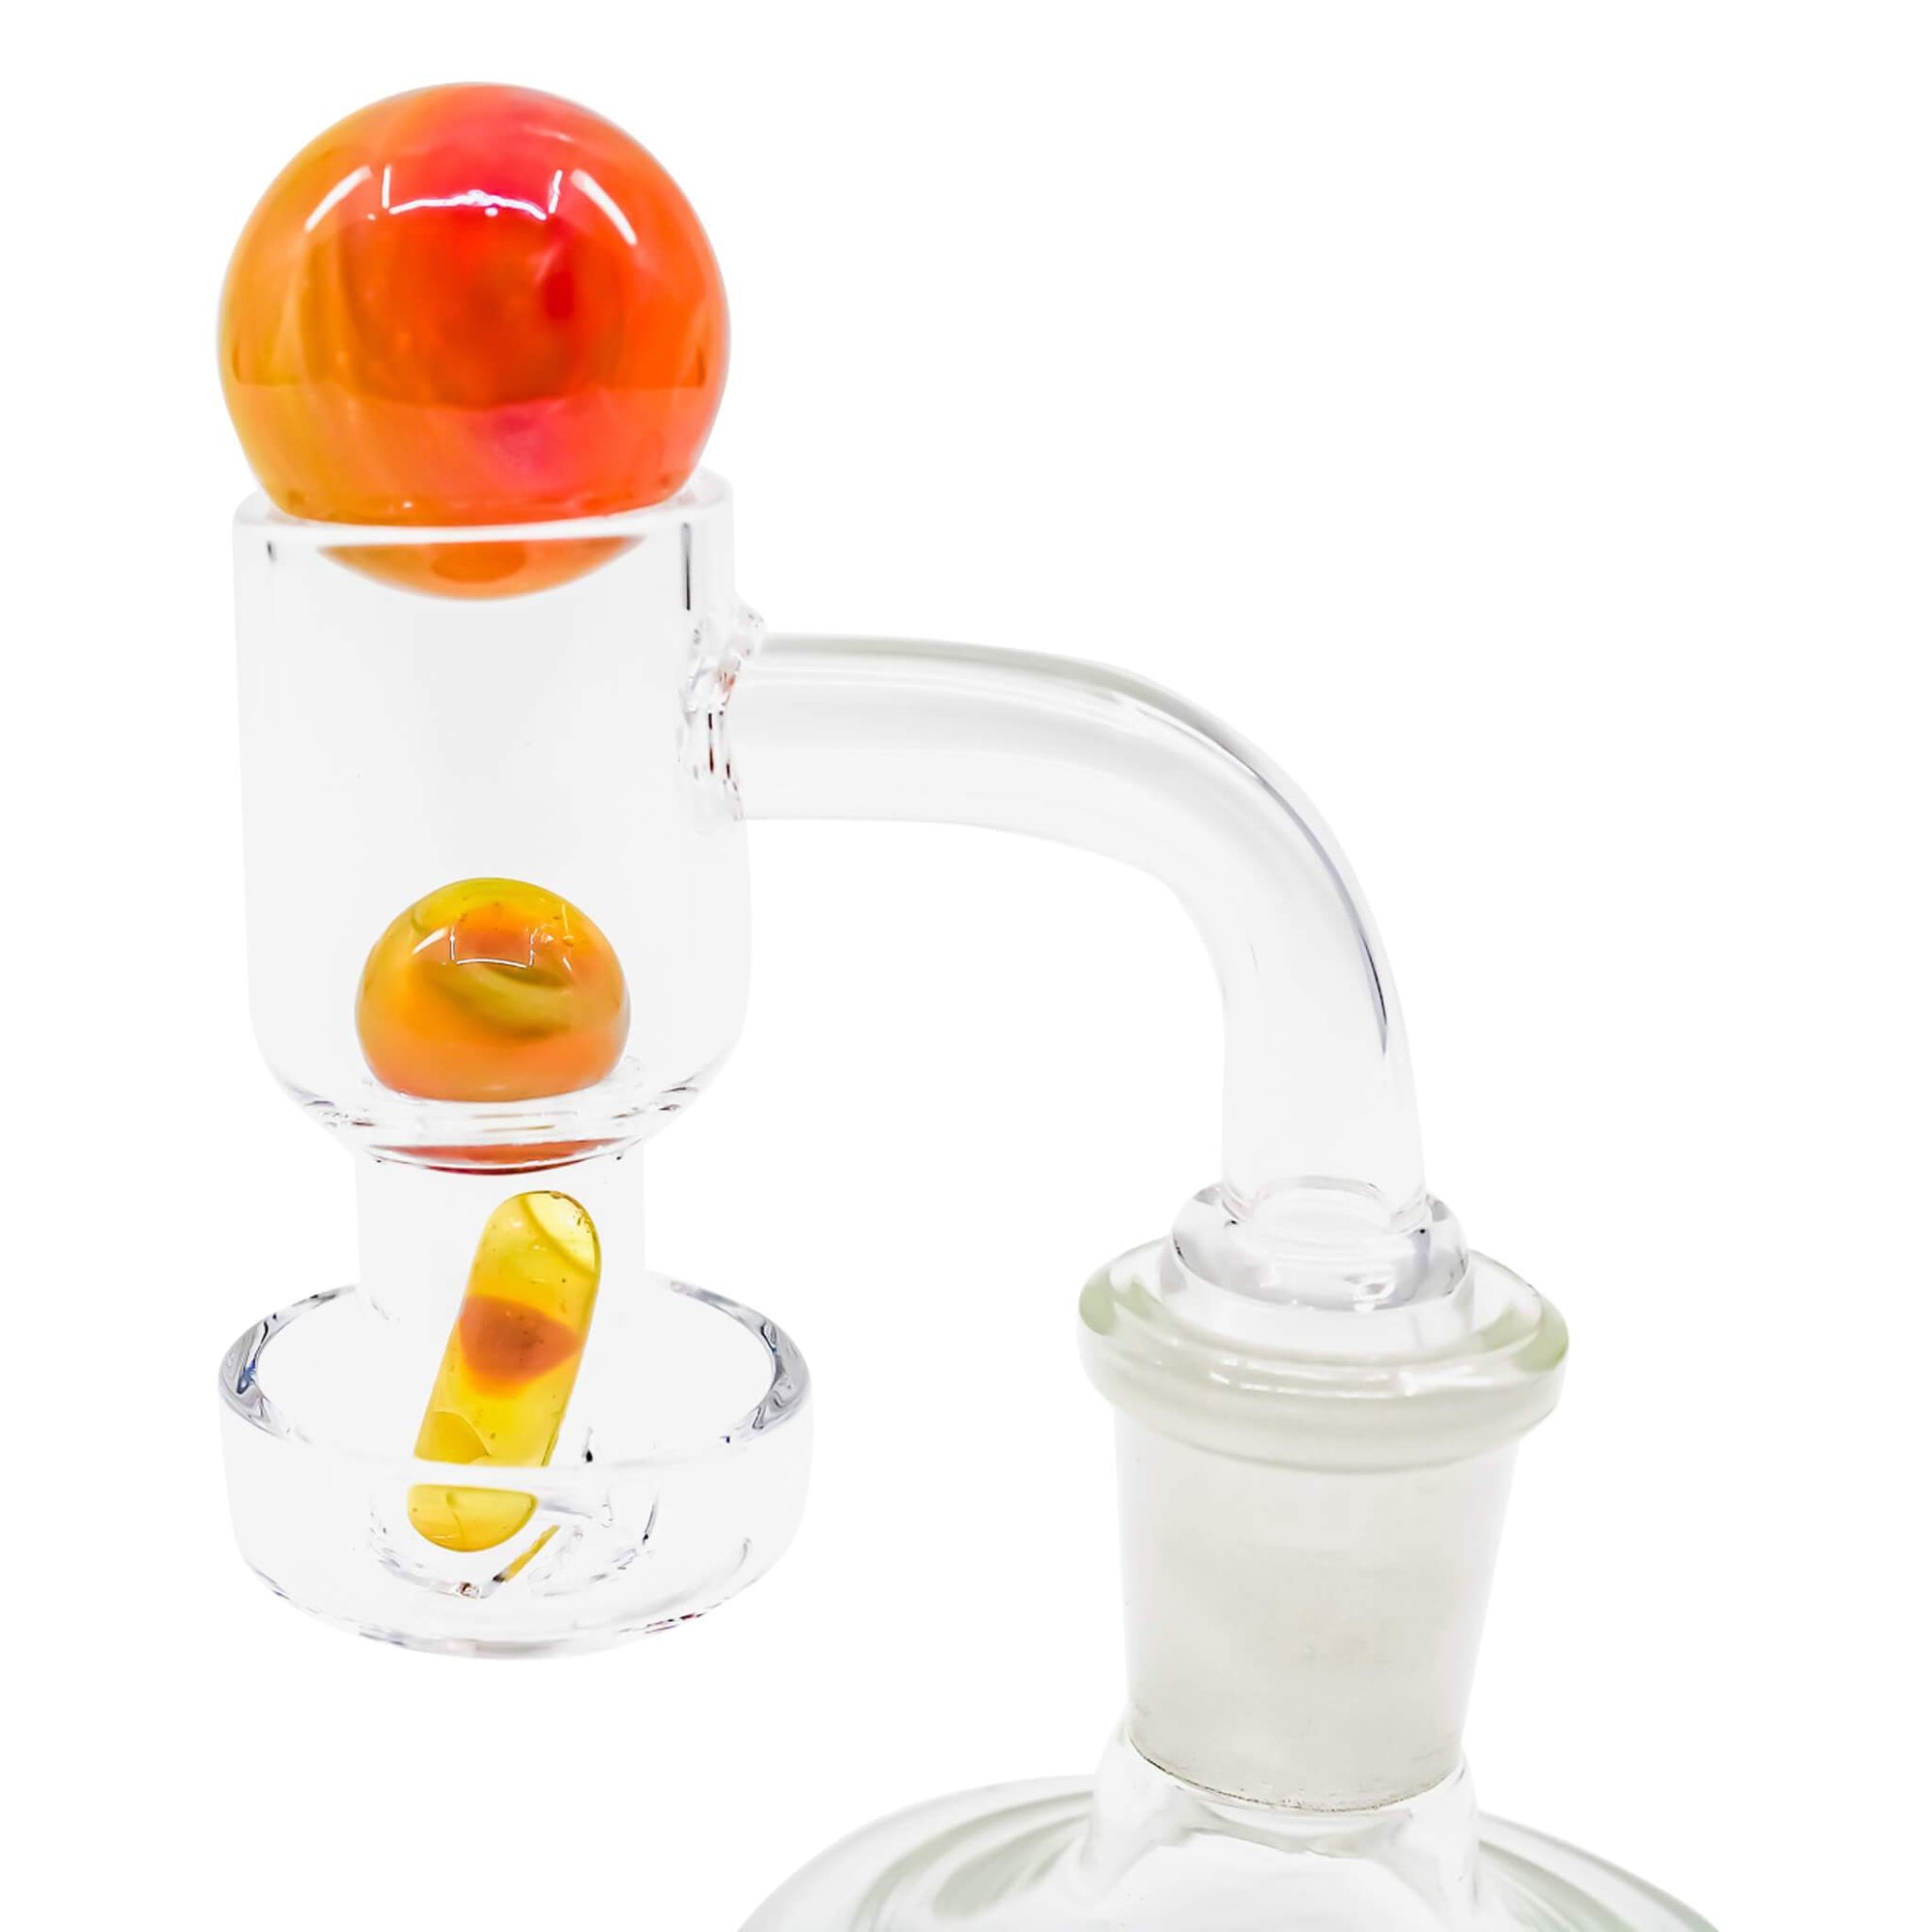 Terp Slurper Marble Set | Green Yellow Brown Maroon Marble Set View | the dabbing specialists